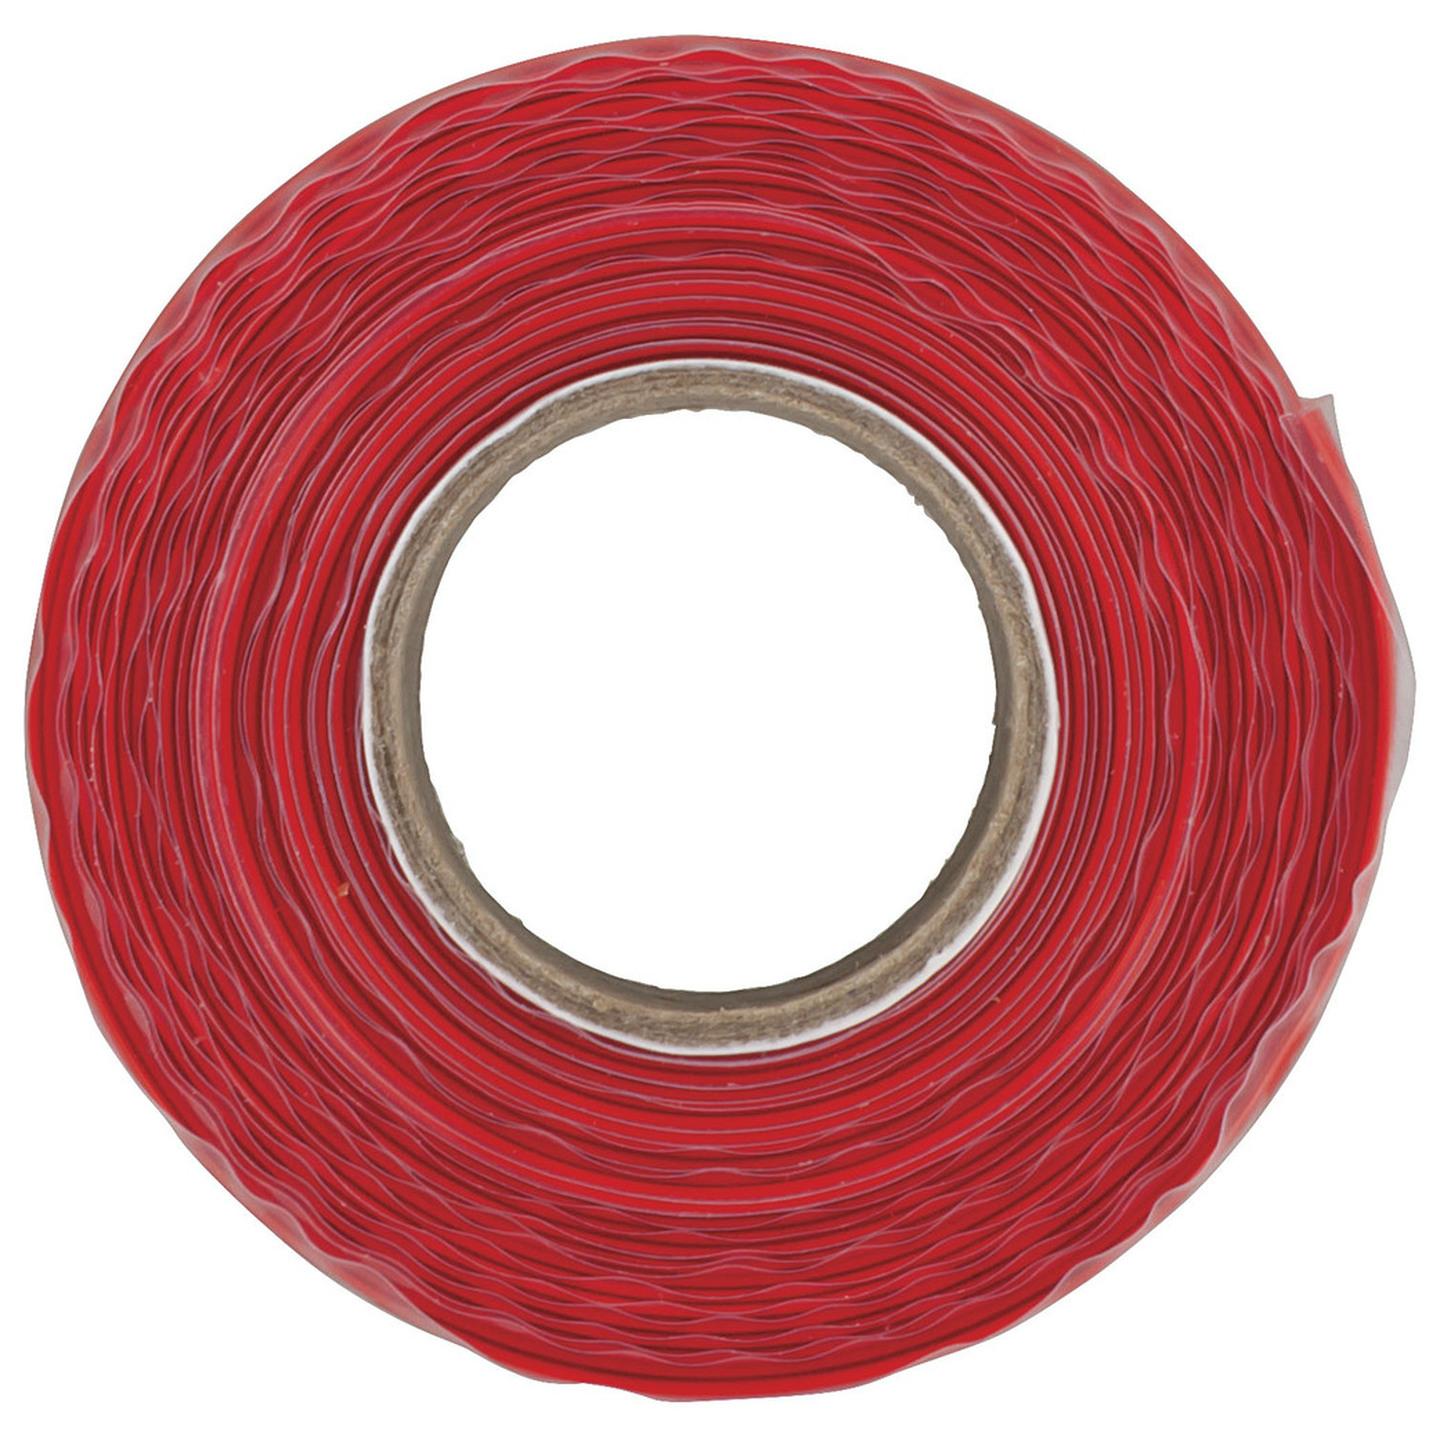 Red Self-Fusing Silicone Tape 25mm x 3m